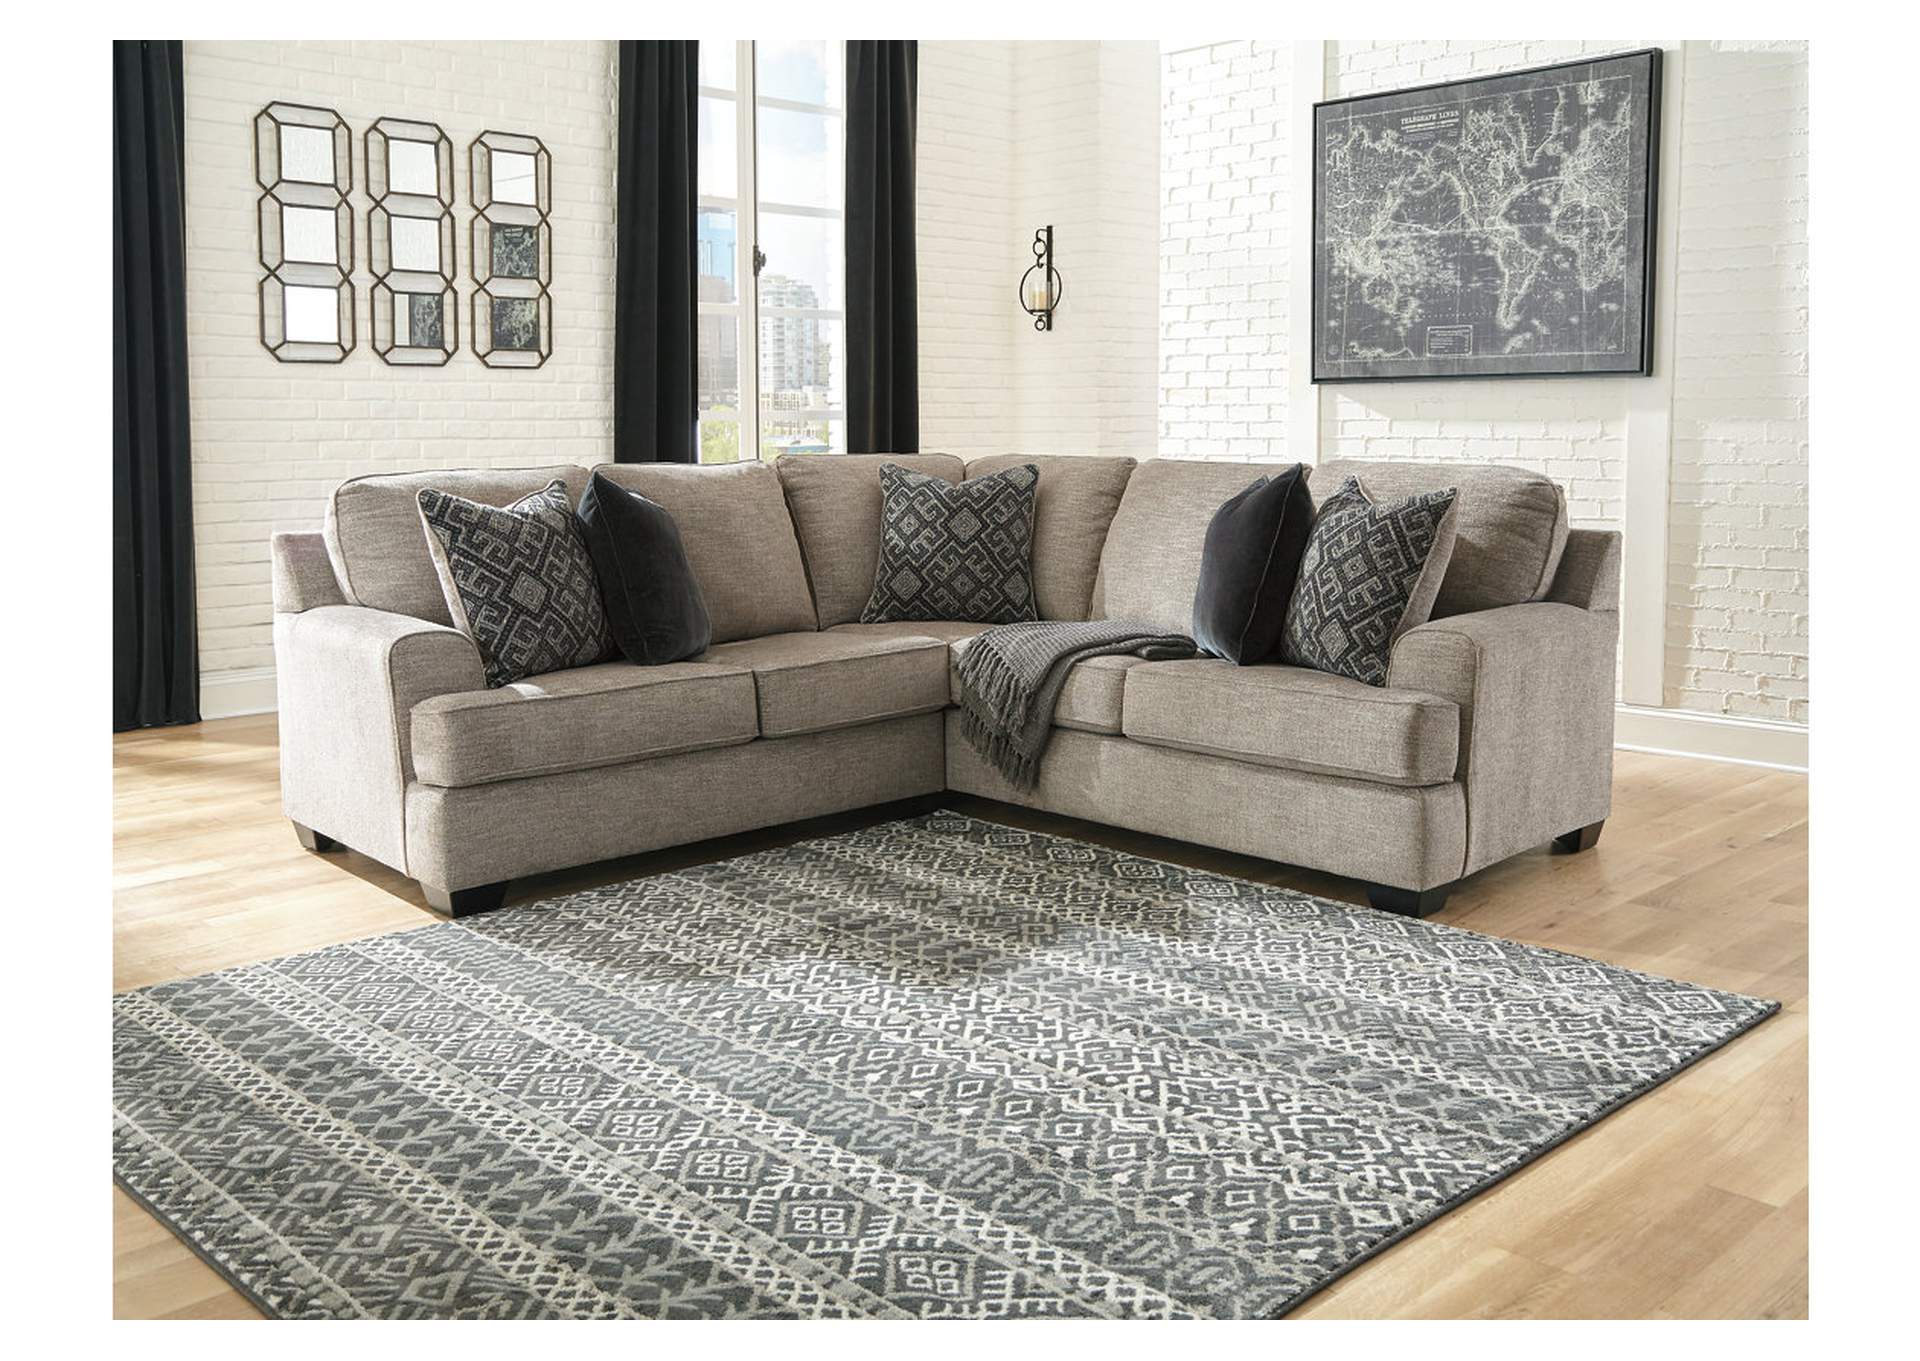 Bovarian 2-Piece Sectional,Signature Design By Ashley